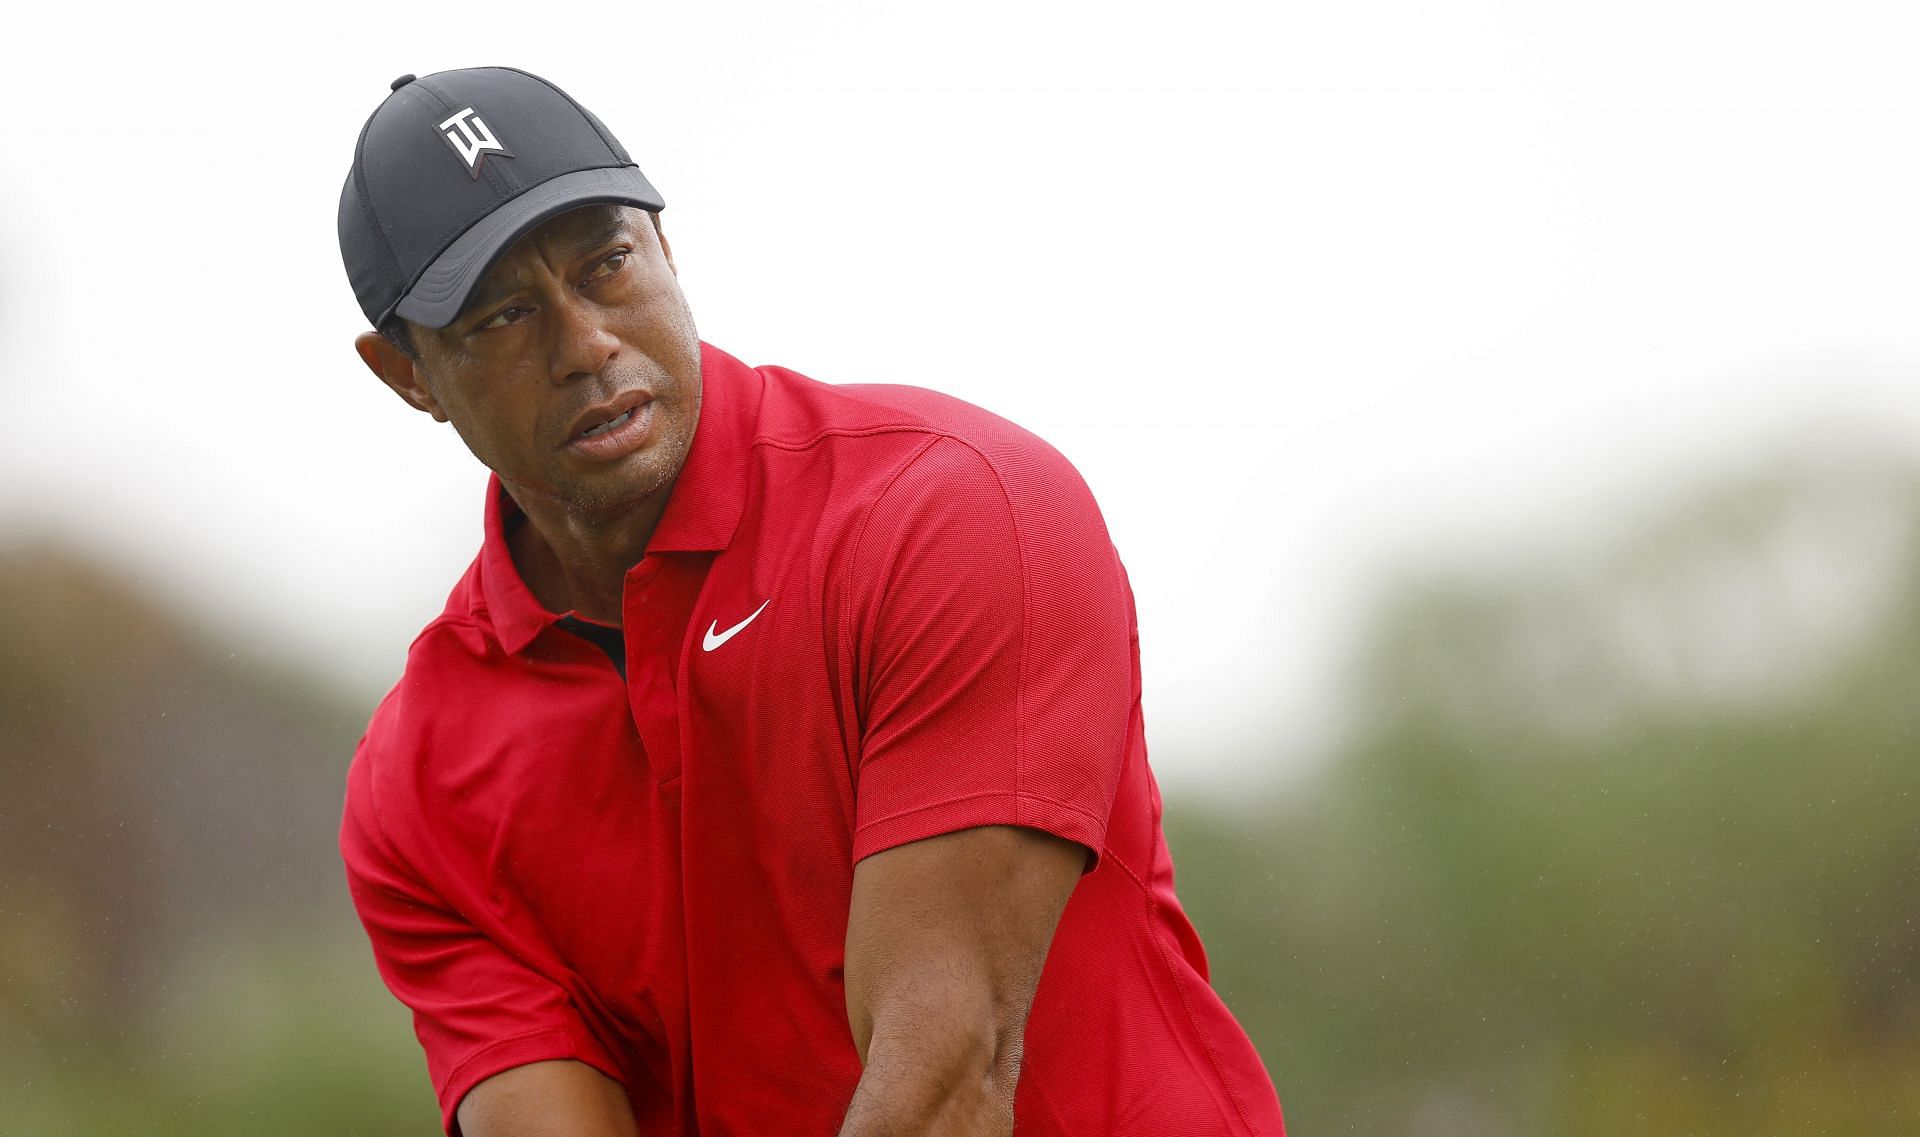 Tiger Woods is no longer with Nike